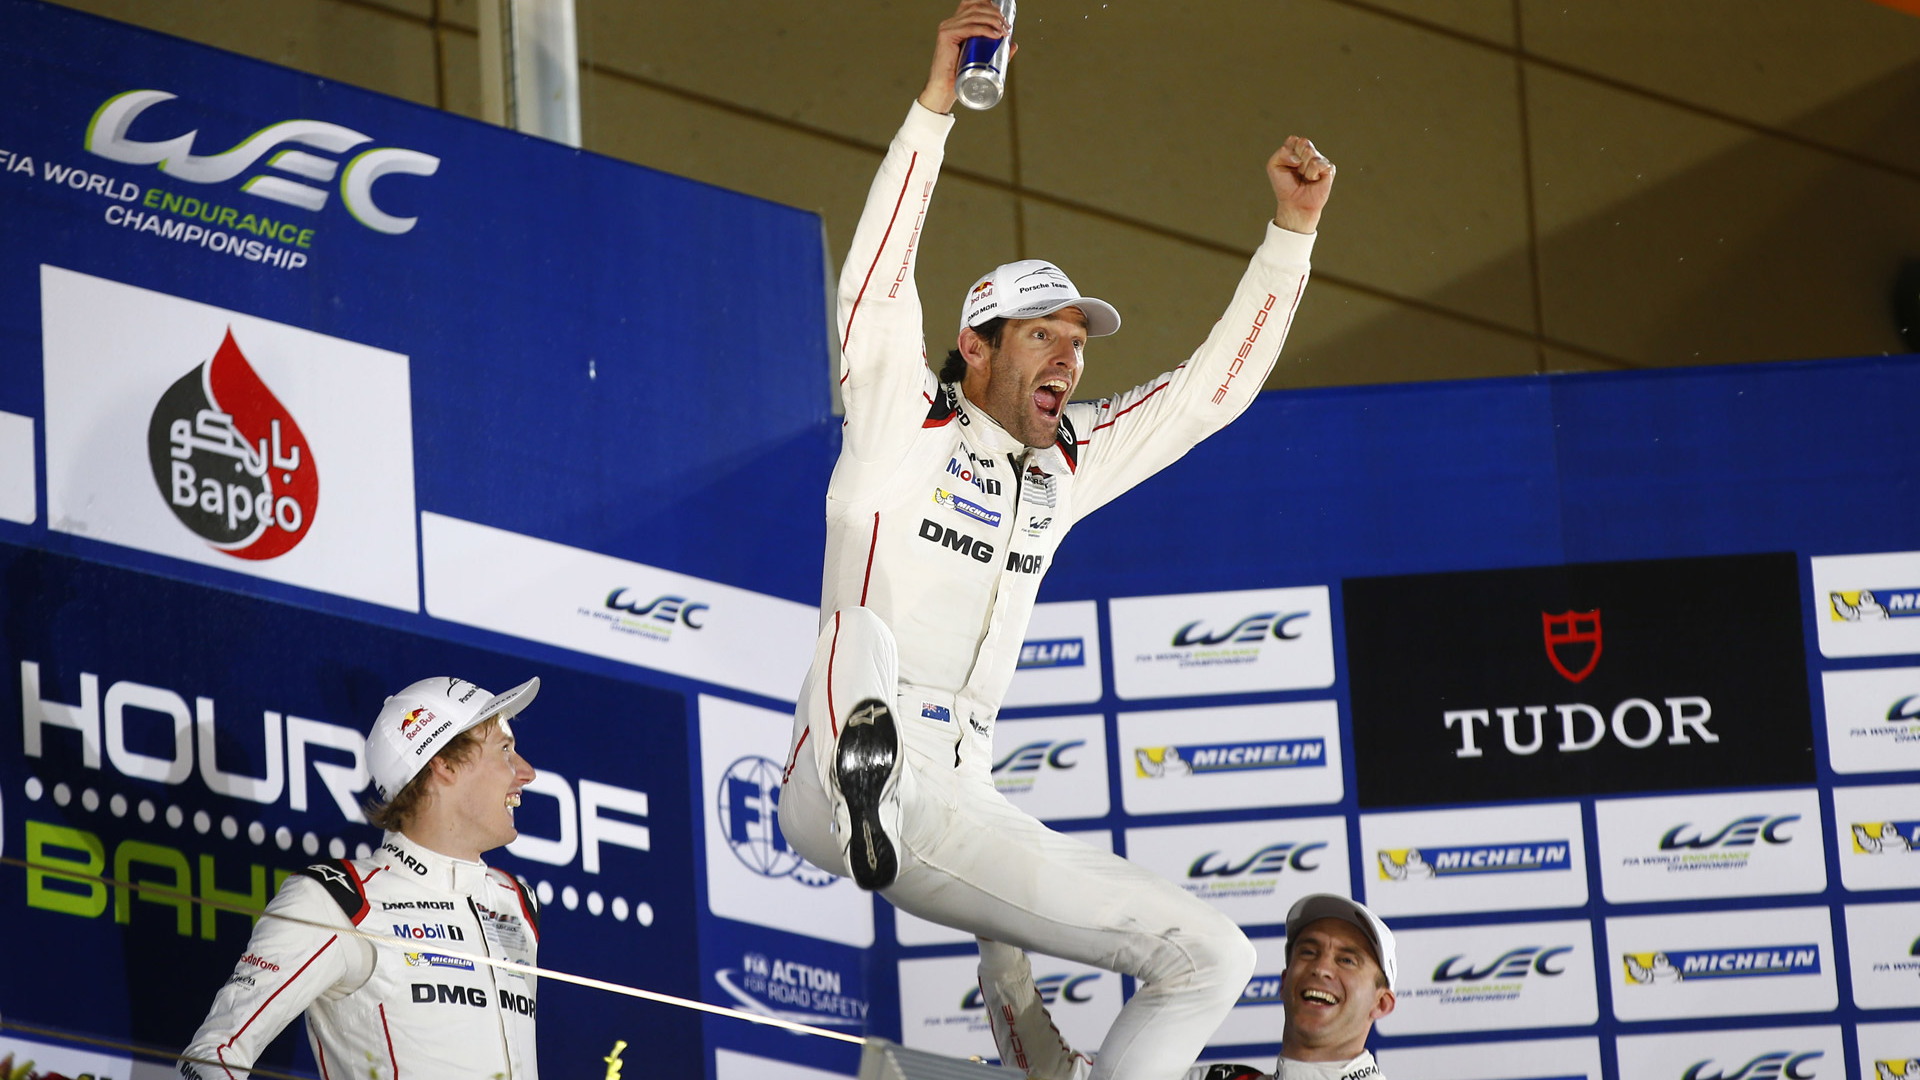 Porsche celebrates Drivers’ and Constructors’ titles in the 2015 World Endurance Championship